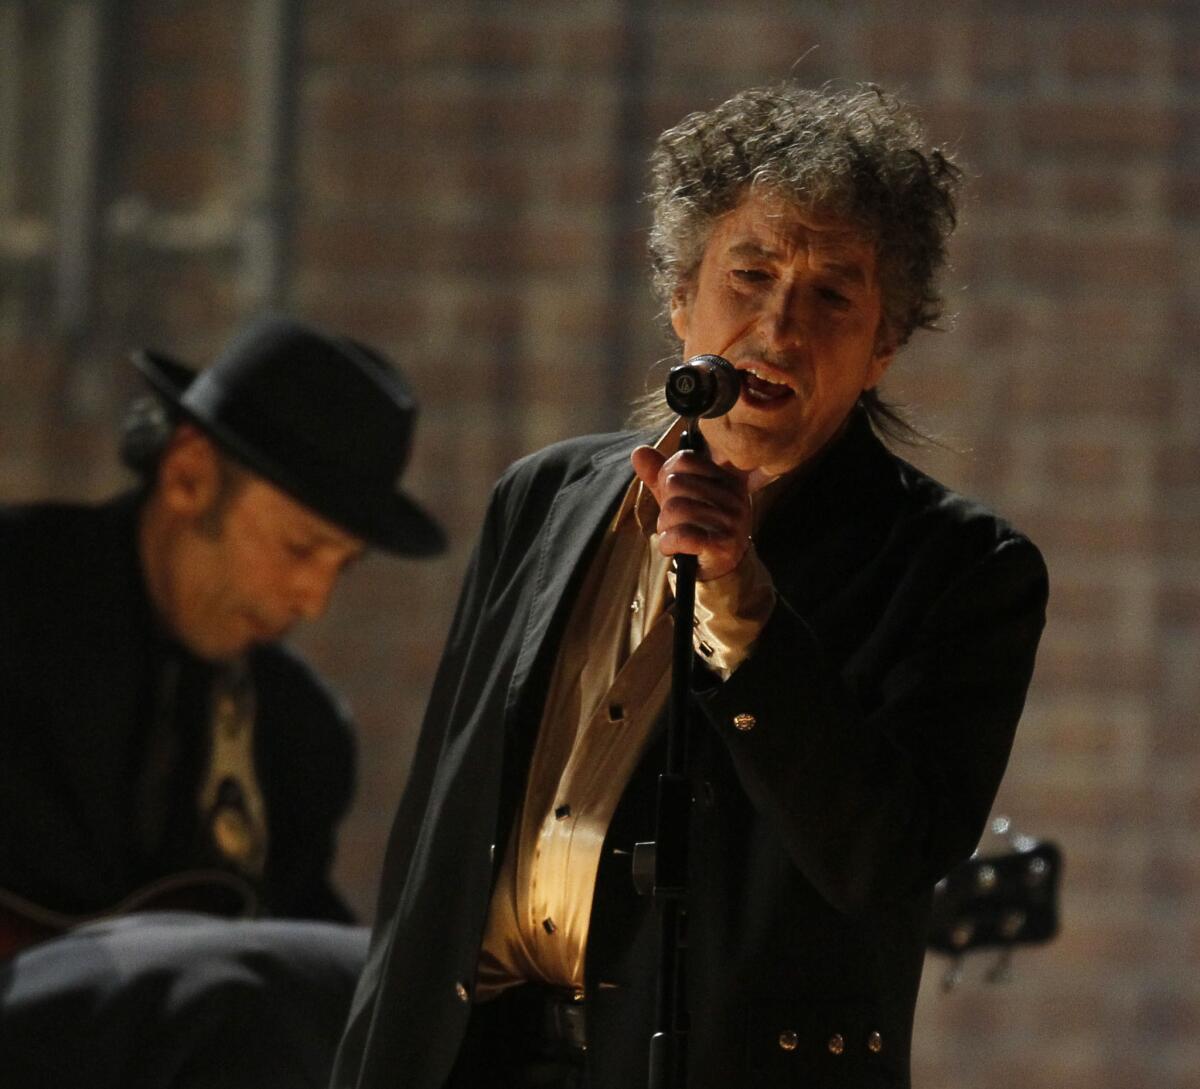 Bob Dylan, seen performing at the Grammy Awards in 2011, will tour the U.S. this summer.